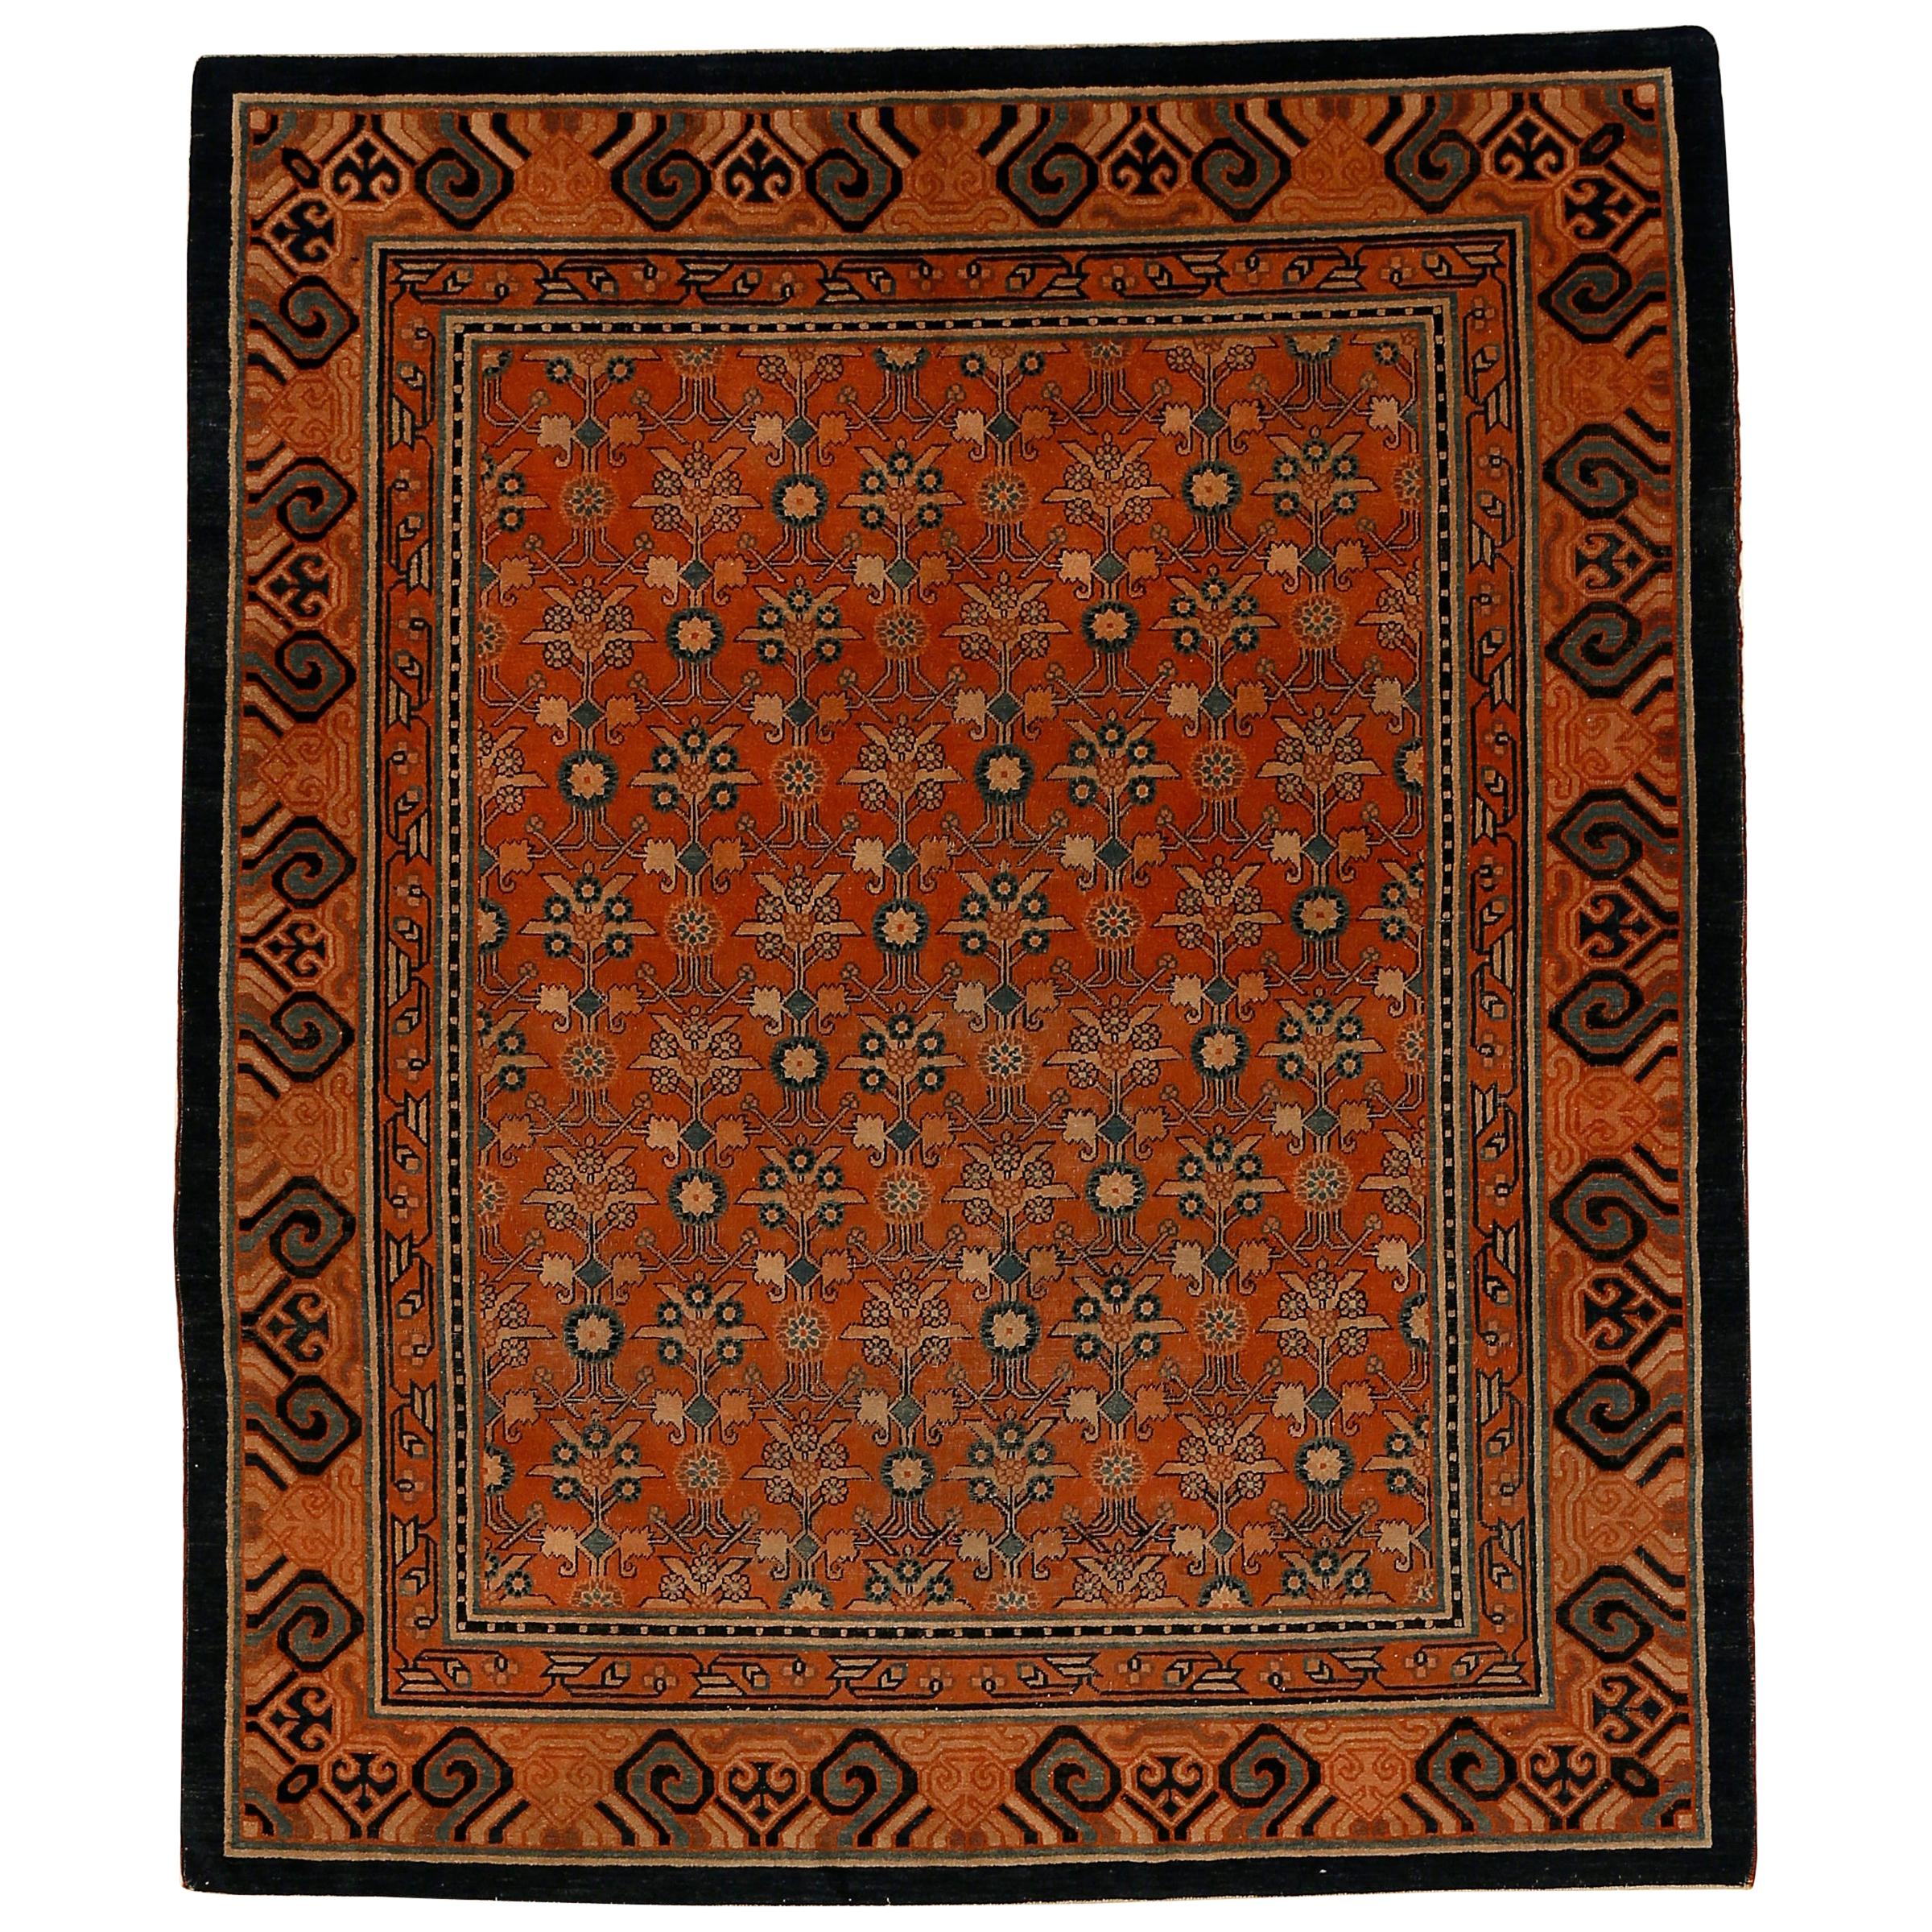 What is a mogul rug?